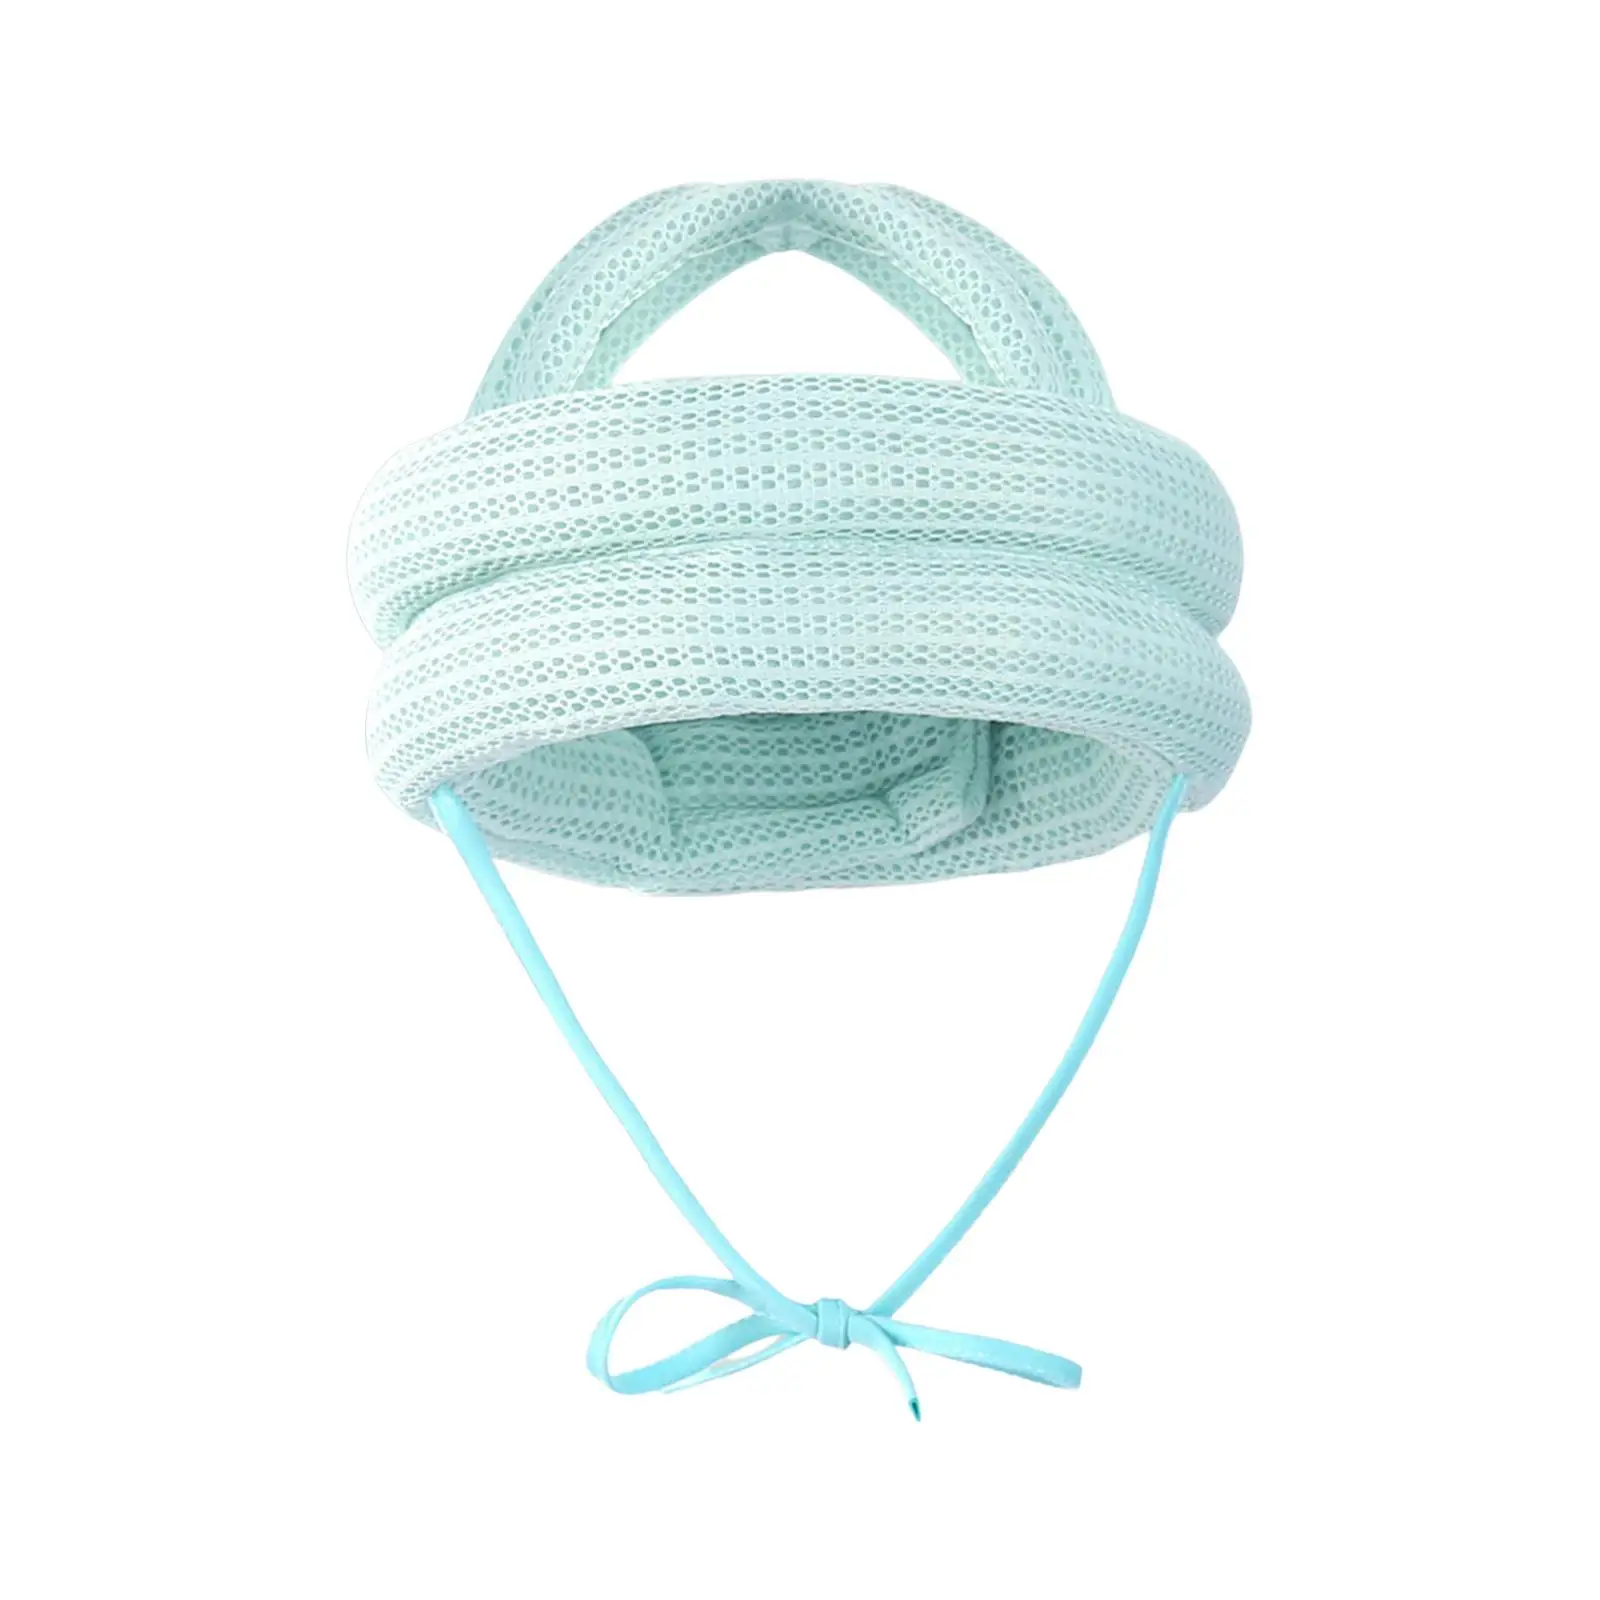 Protective Harnesses Cap Portable Adjustable Baby Hat Head Protector for Kids Children 0-5 Years Old Playing Walking